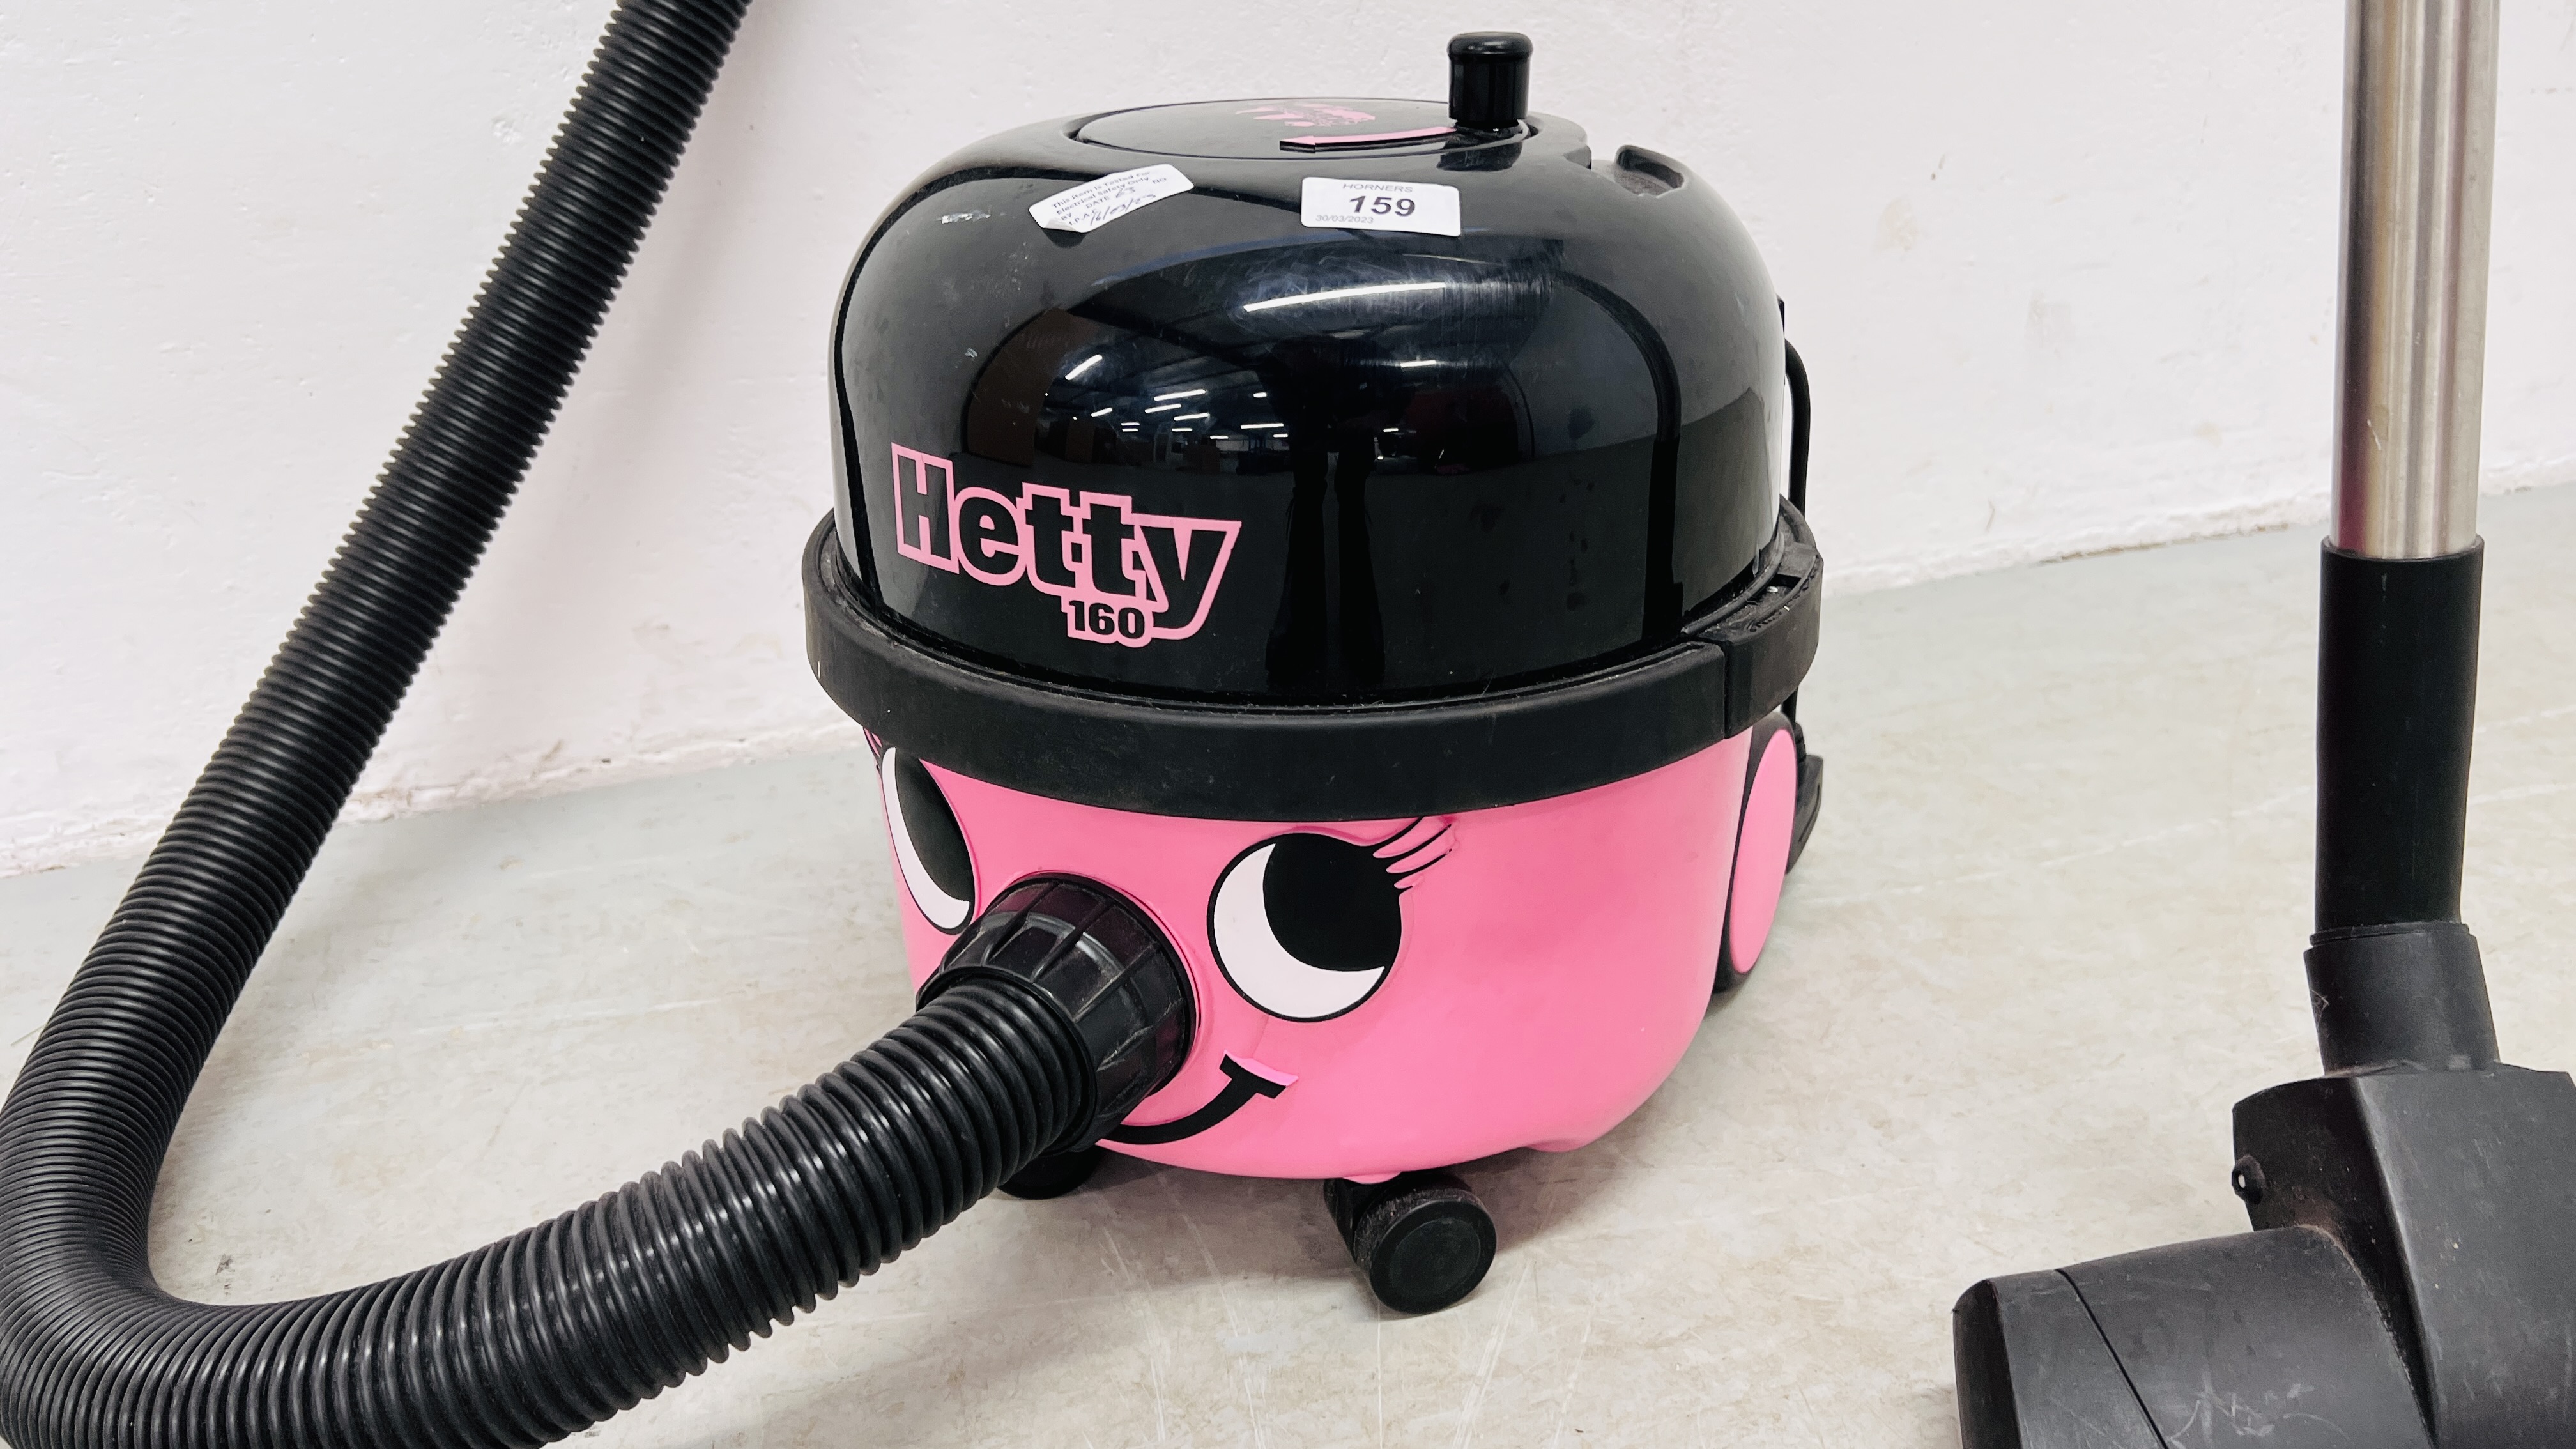 PNEUMATIC "HETTY" VACUUM CLEANER - SOLD AS SEEN. - Image 2 of 4